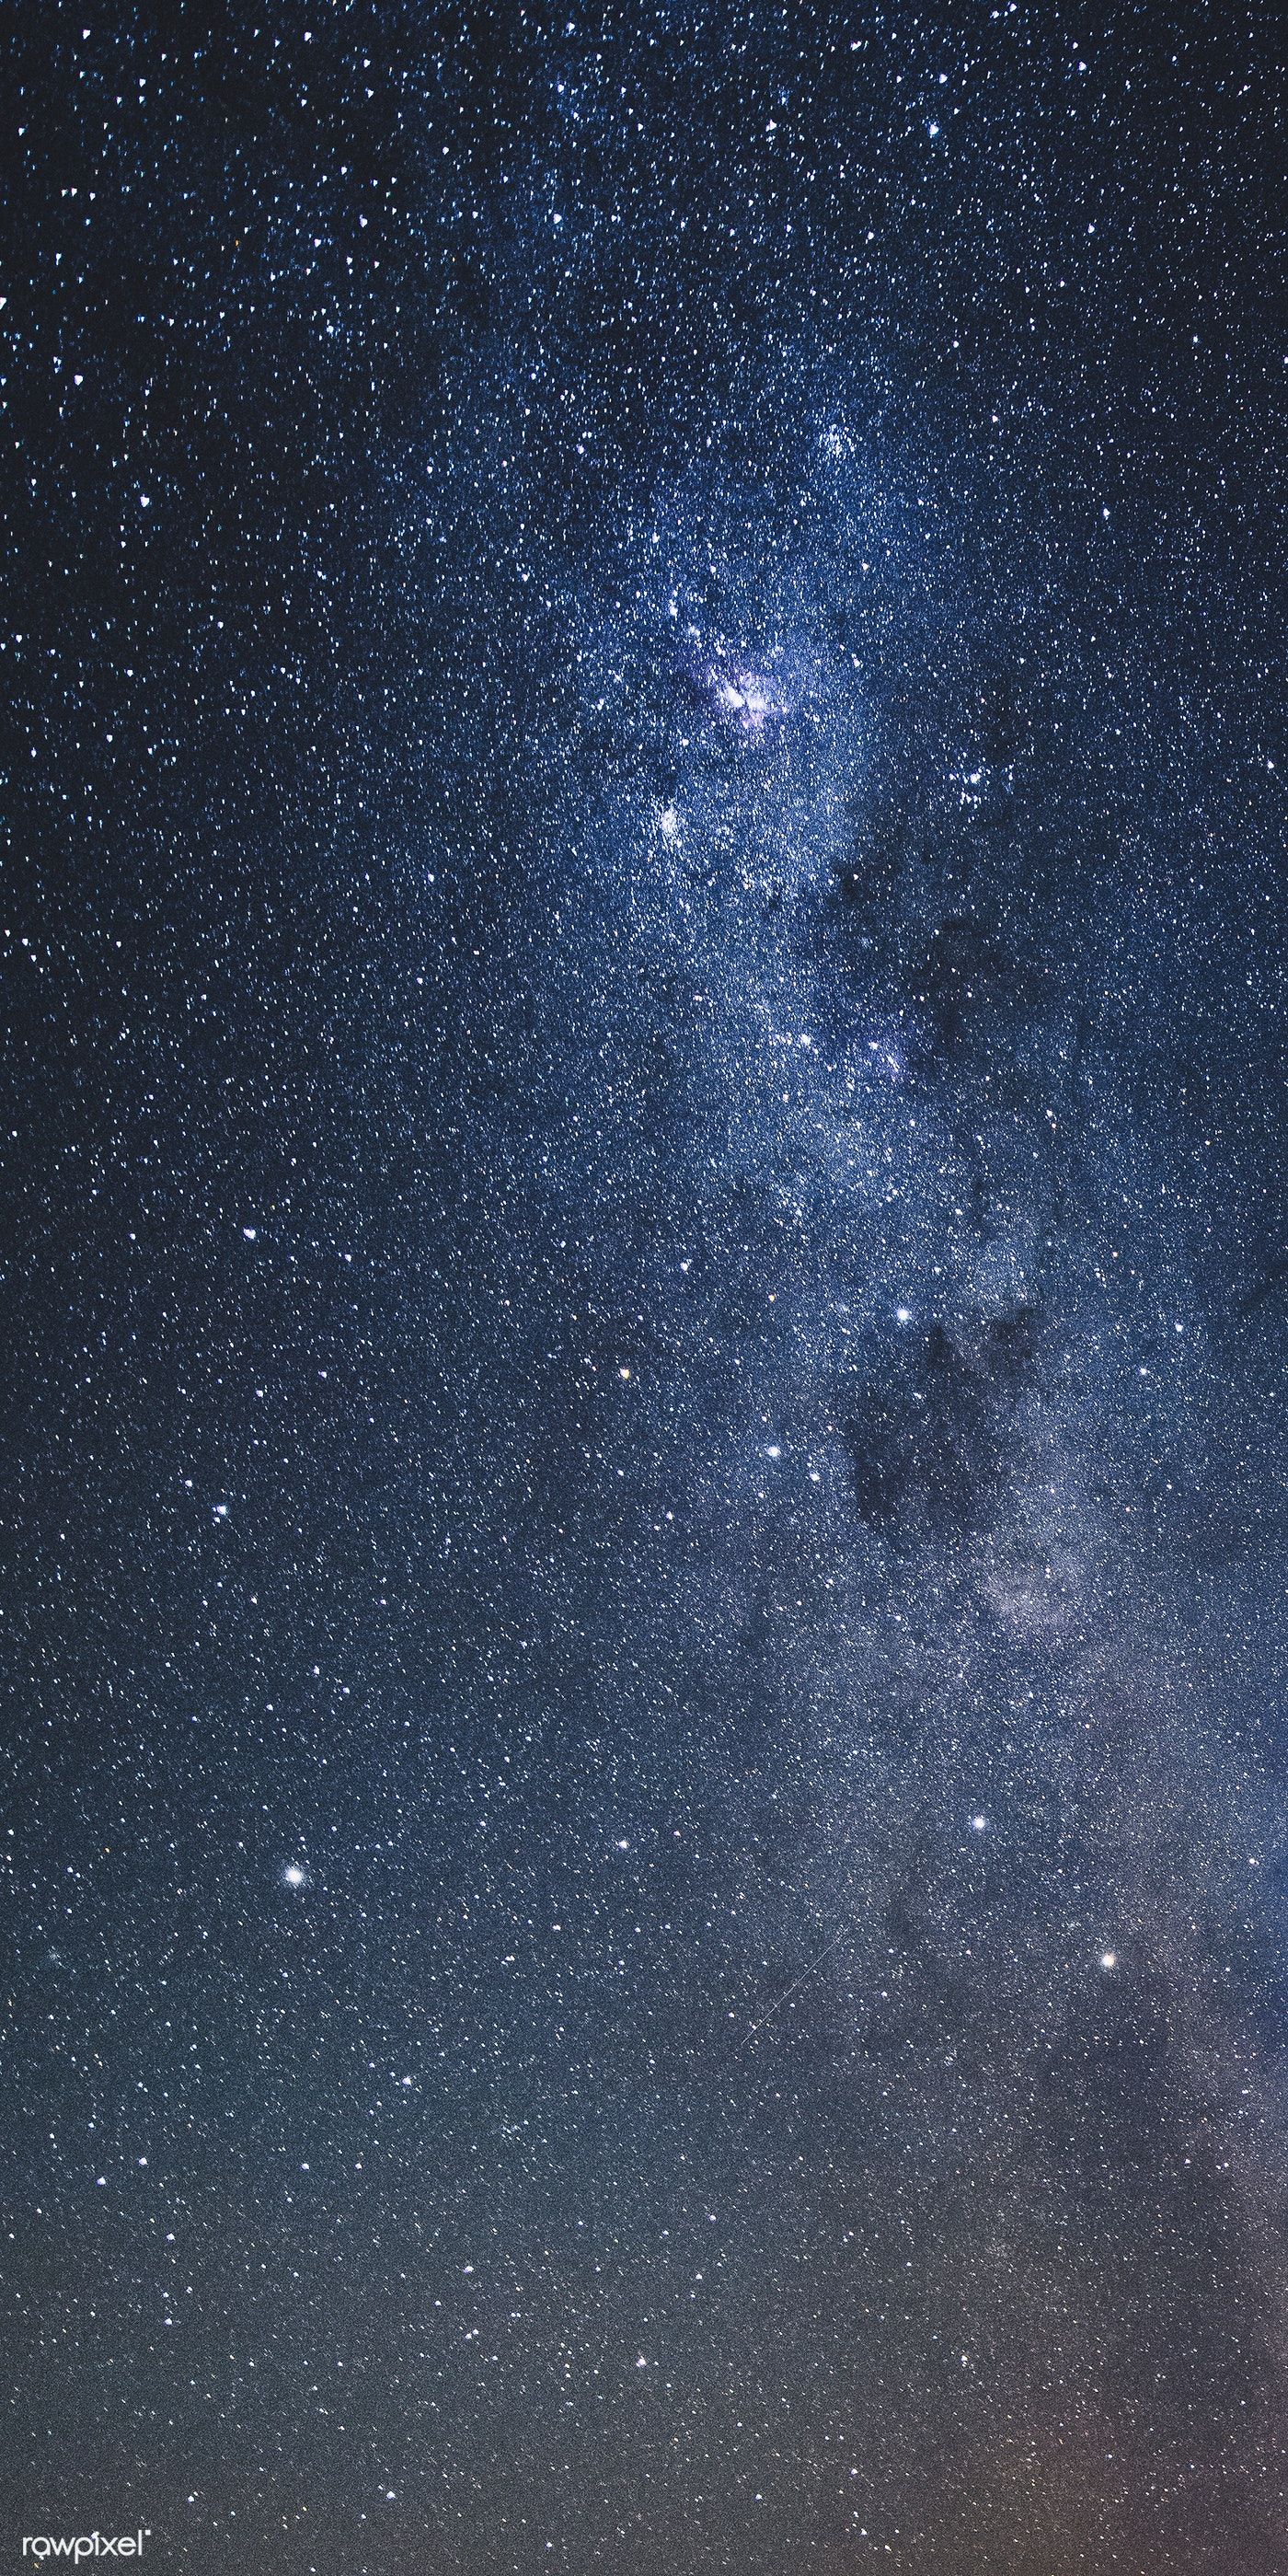 Download free image of Beautiful milky way in the night sky by Luke Stackpoole about night sky, galaxy, night star, constellation, and celestial 843924